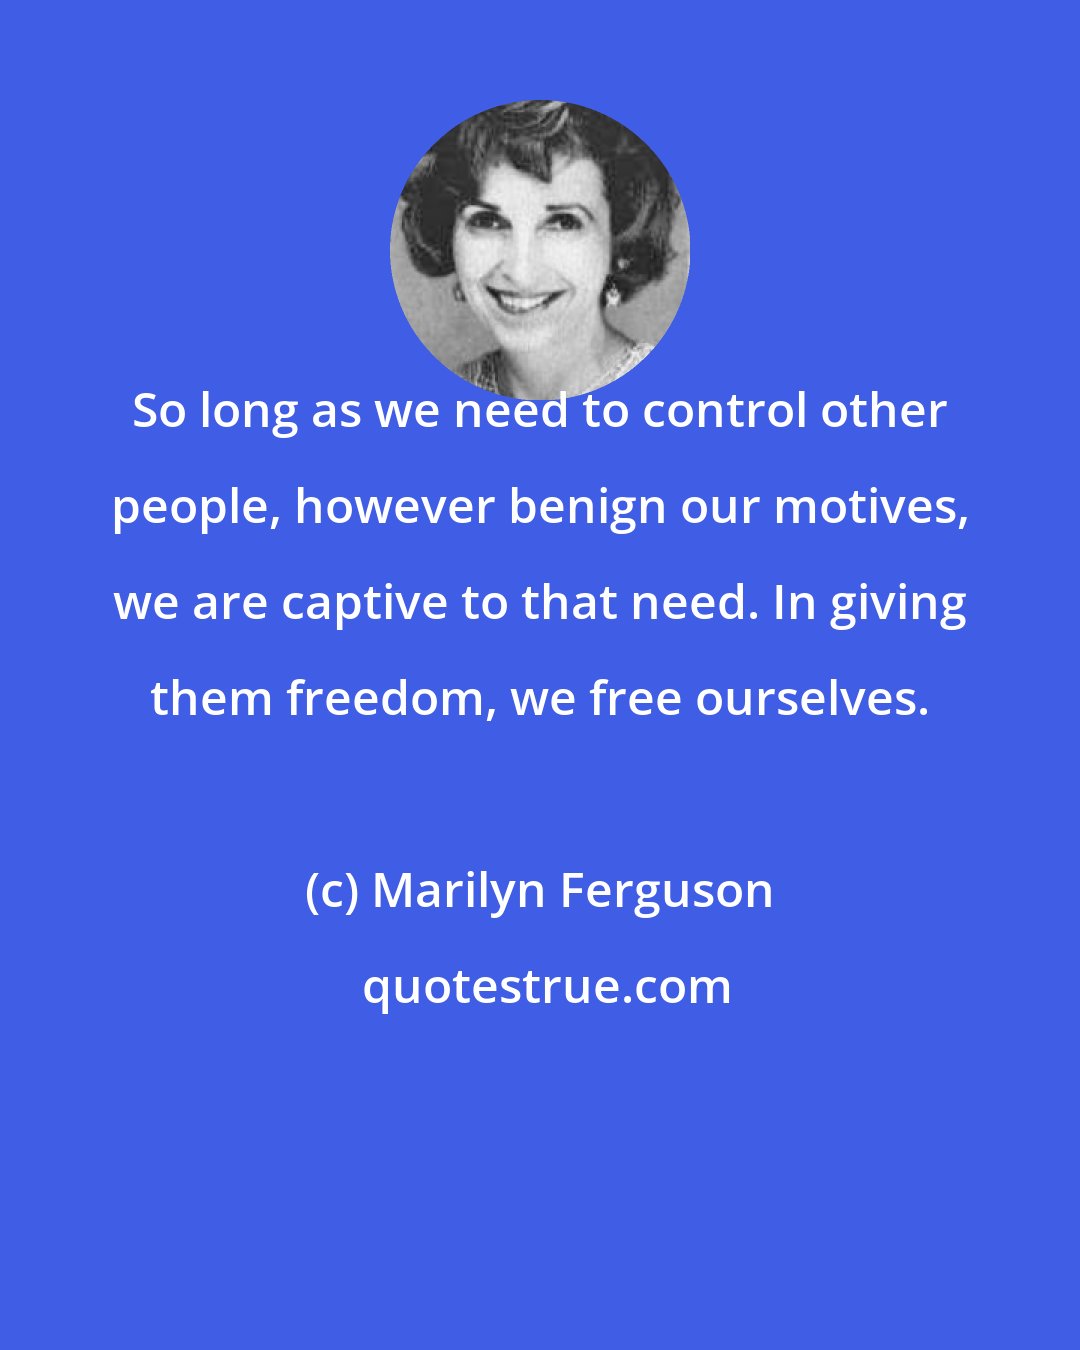 Marilyn Ferguson: So long as we need to control other people, however benign our motives, we are captive to that need. In giving them freedom, we free ourselves.